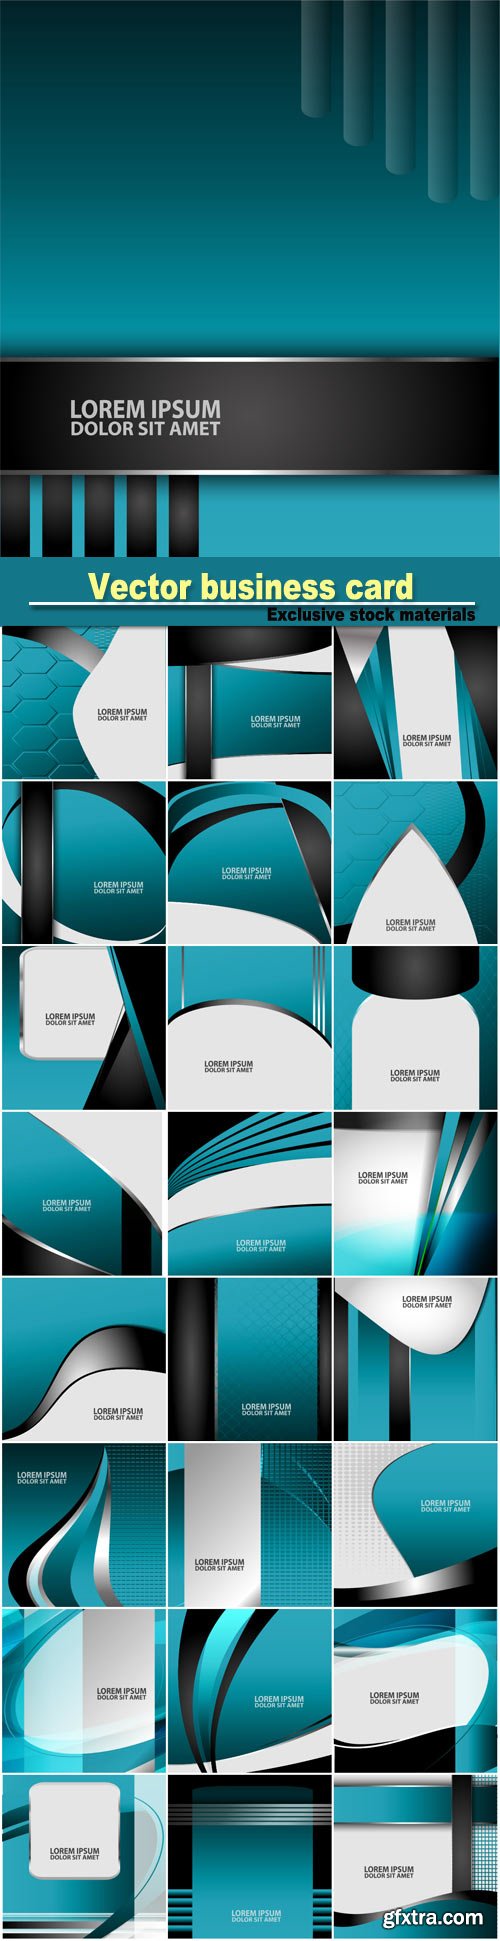 Vector business card in abstract style